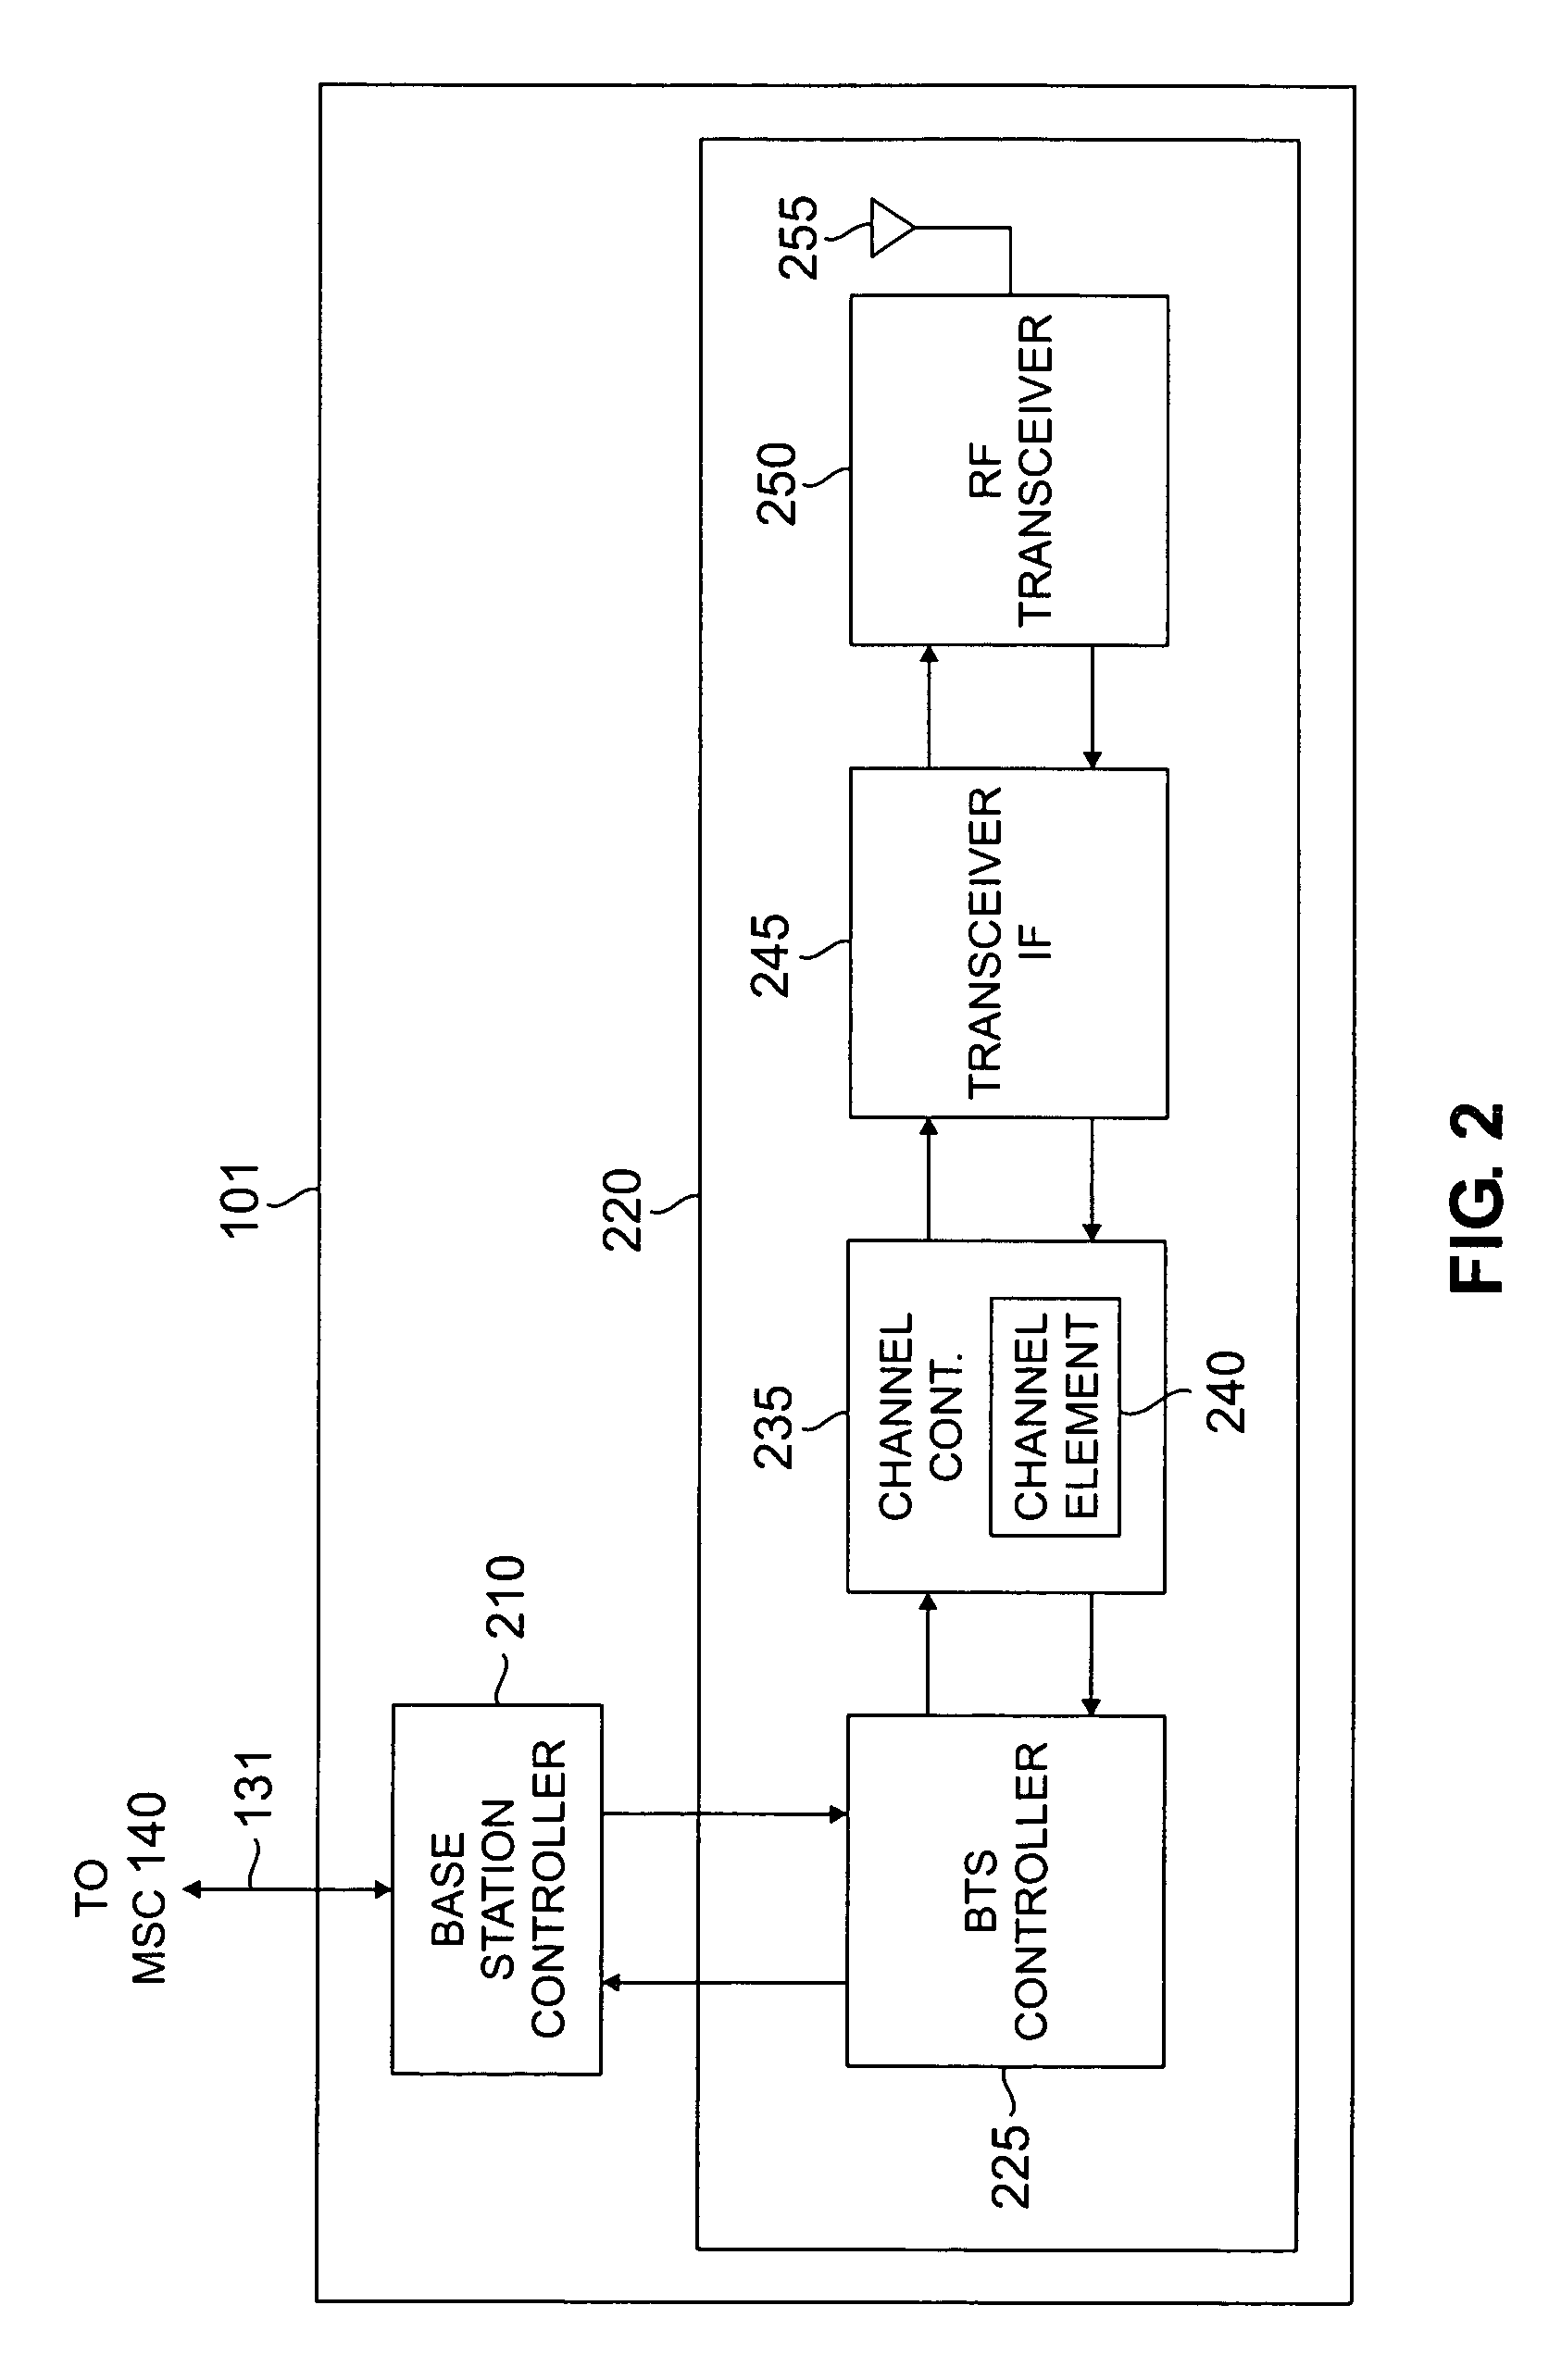 Apparatus and method for interference cancellation in wireless mobile stations operating concurrently on two or more air interfaces